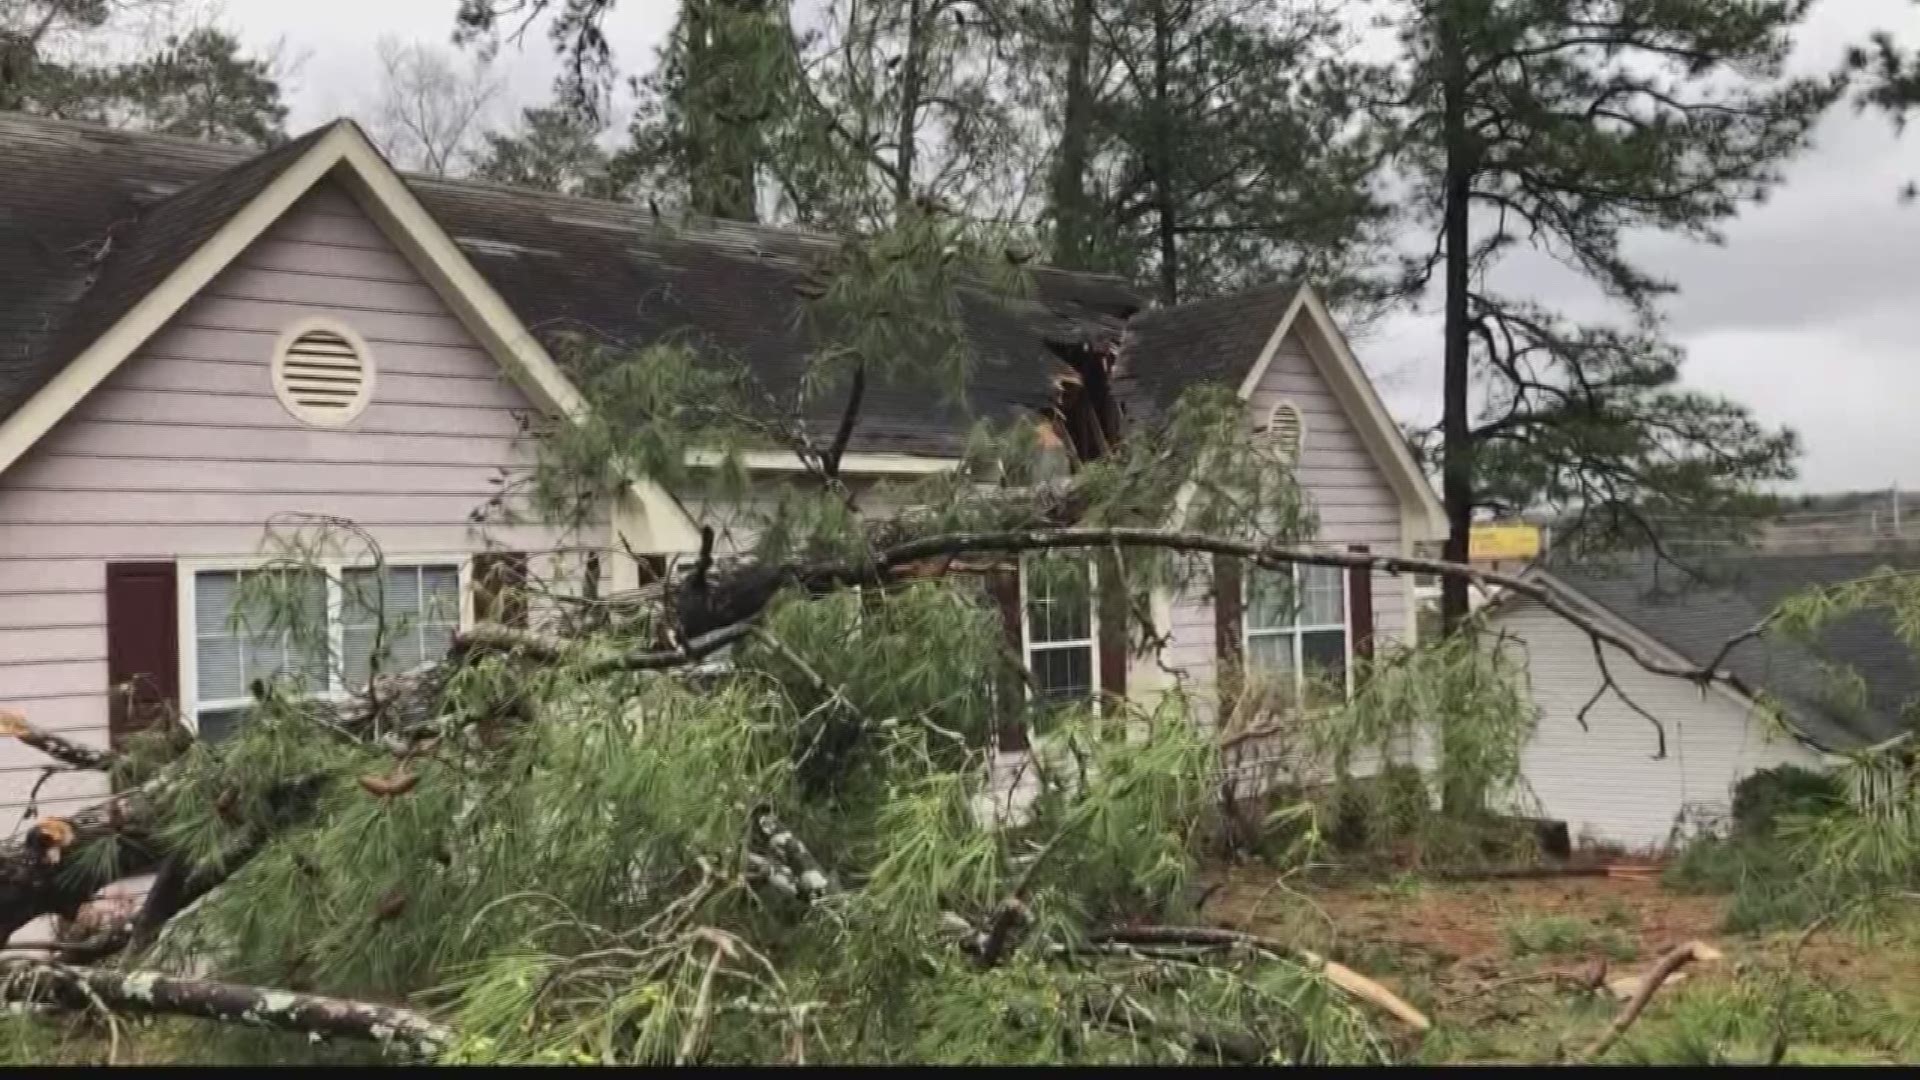 The apparent tornado struck in an area off Greystone Boulevard, which is along Interstate 126 in Columbia.